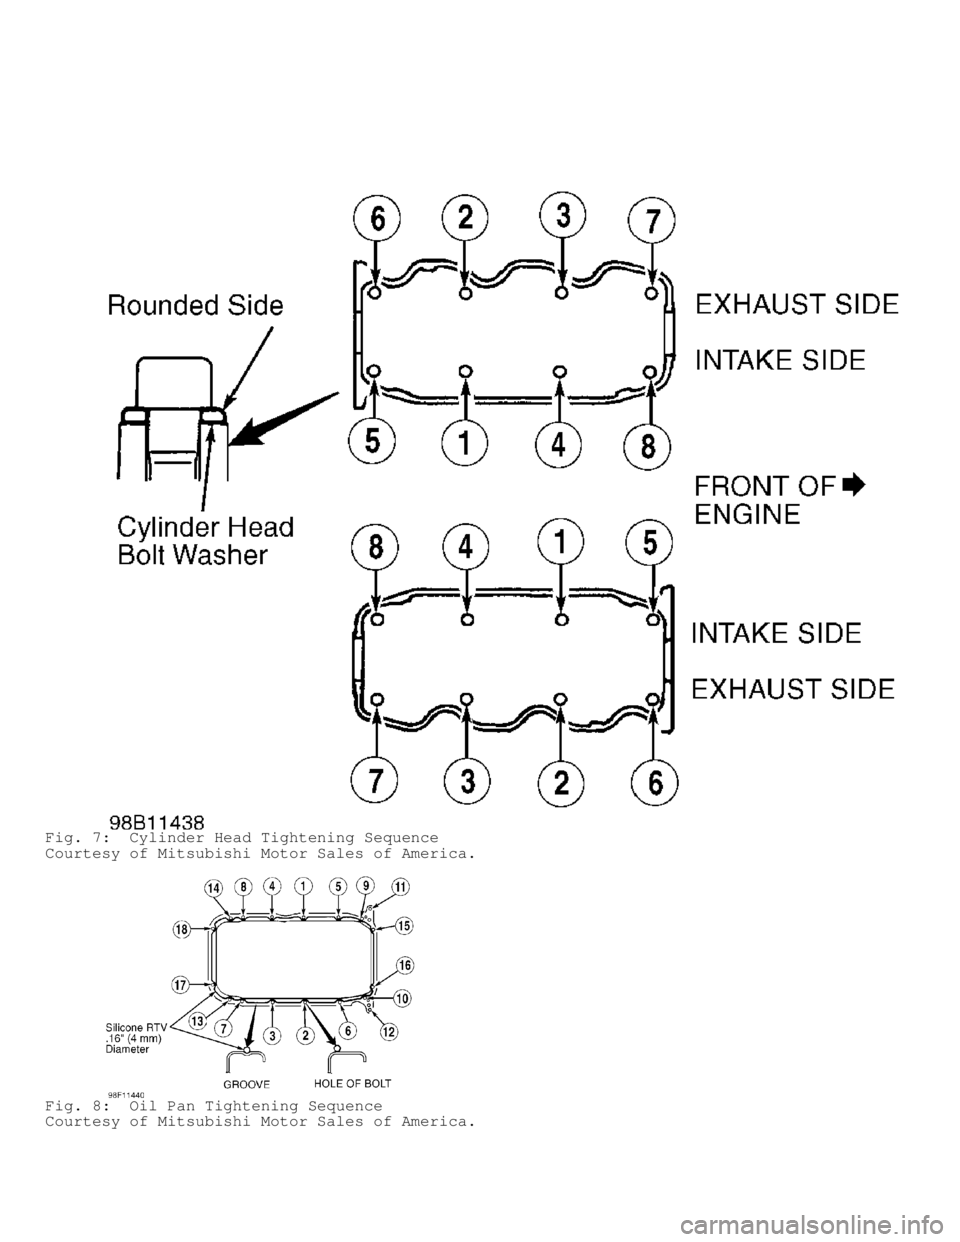 MITSUBISHI MONTERO 1998  Service Manual Fig. 7:  Cylinder Head Tightening Sequence
Courtesy of Mitsubishi Motor Sales of America.
Fig. 8:  Oil Pan Tightening Sequence
Courtesy of Mitsubishi Motor Sales of America.                           